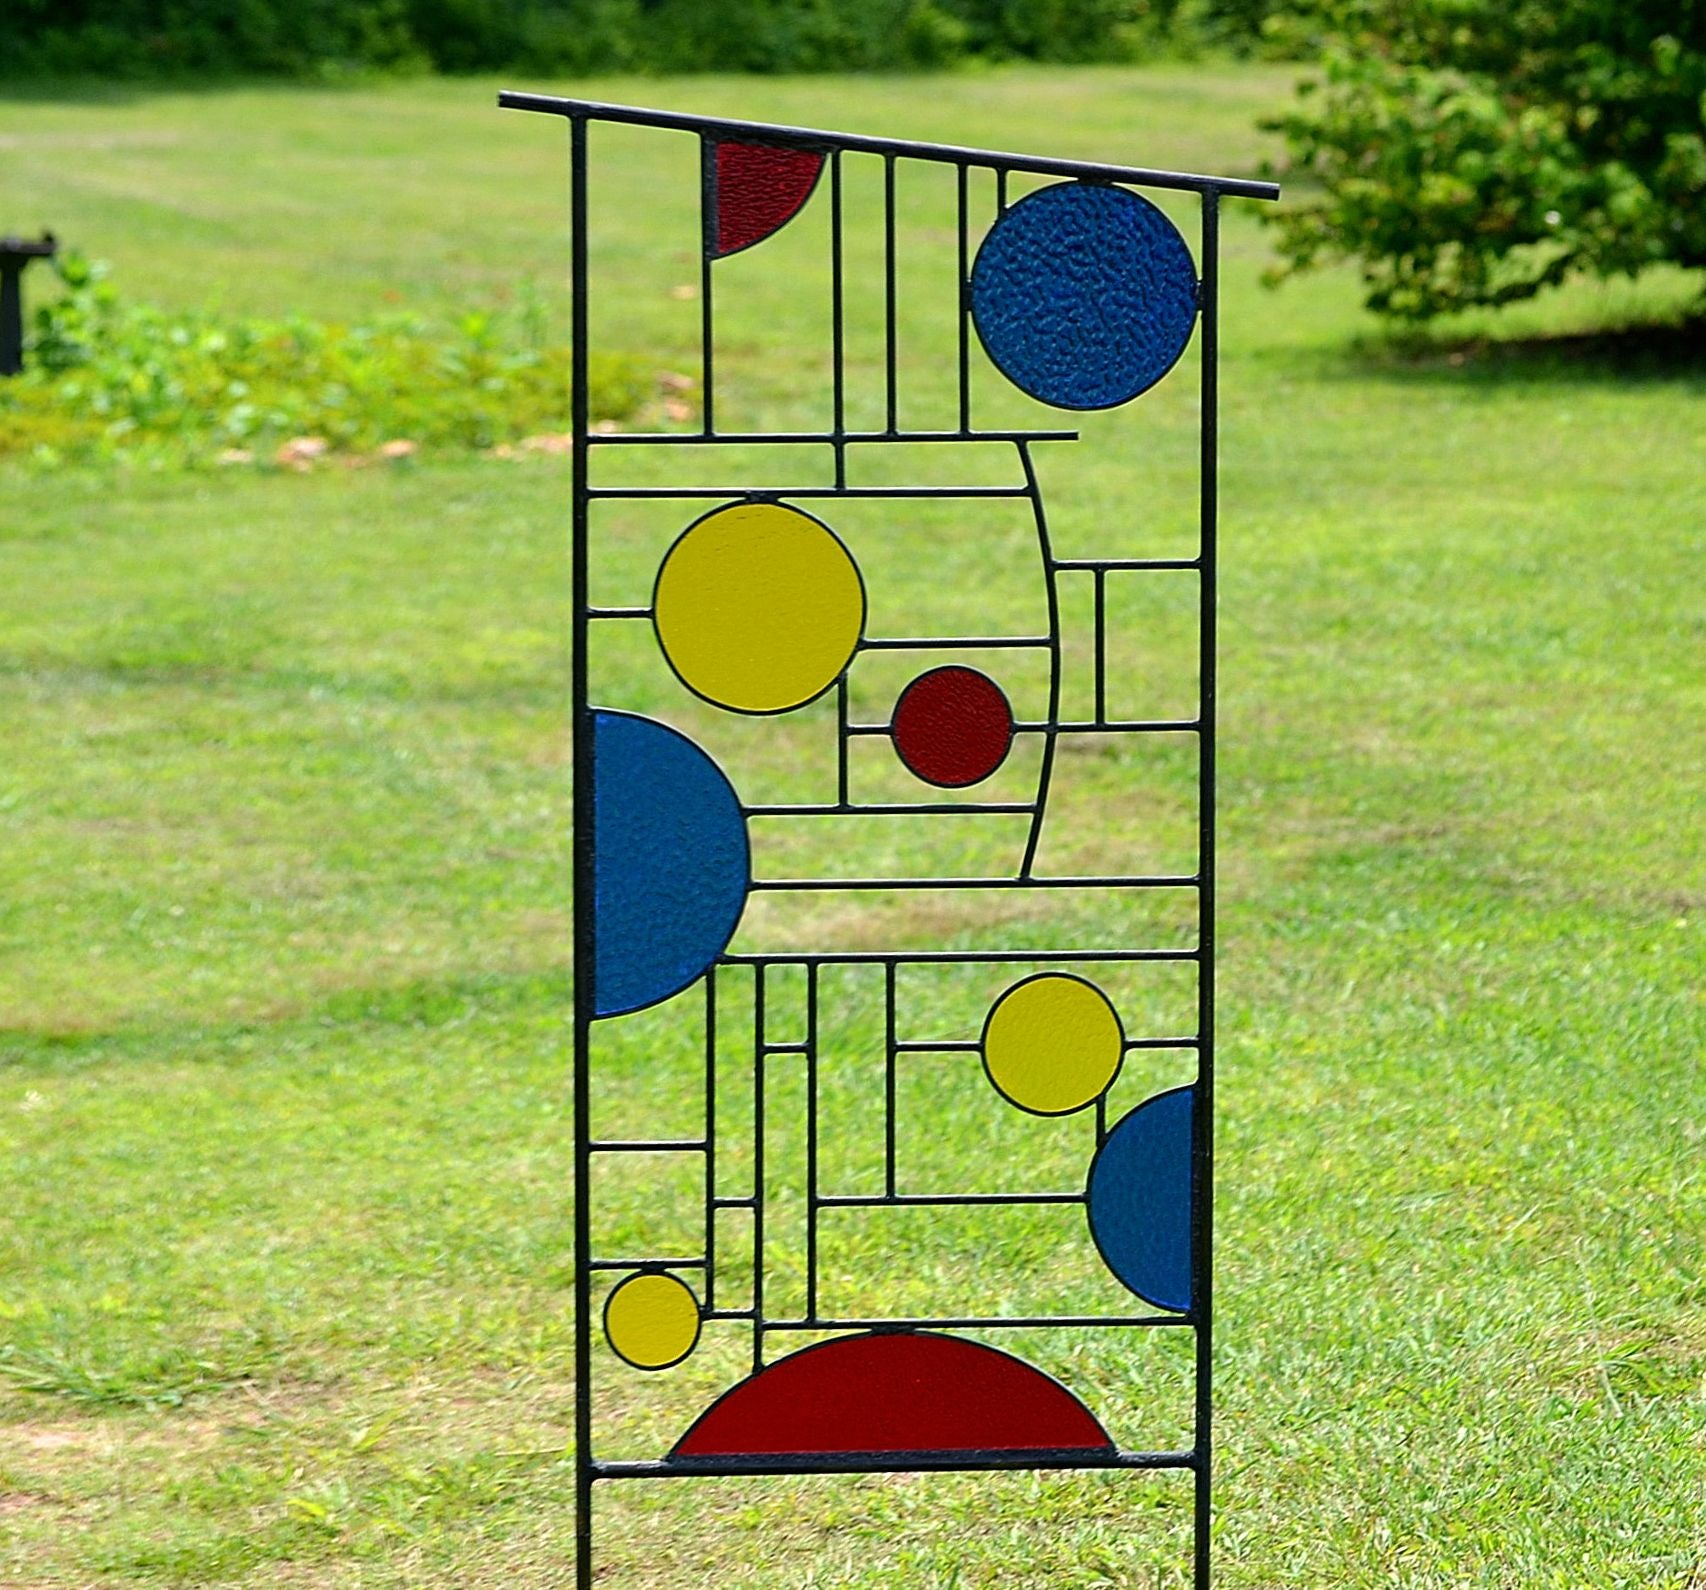 Windsong Glass Studio stained glass art